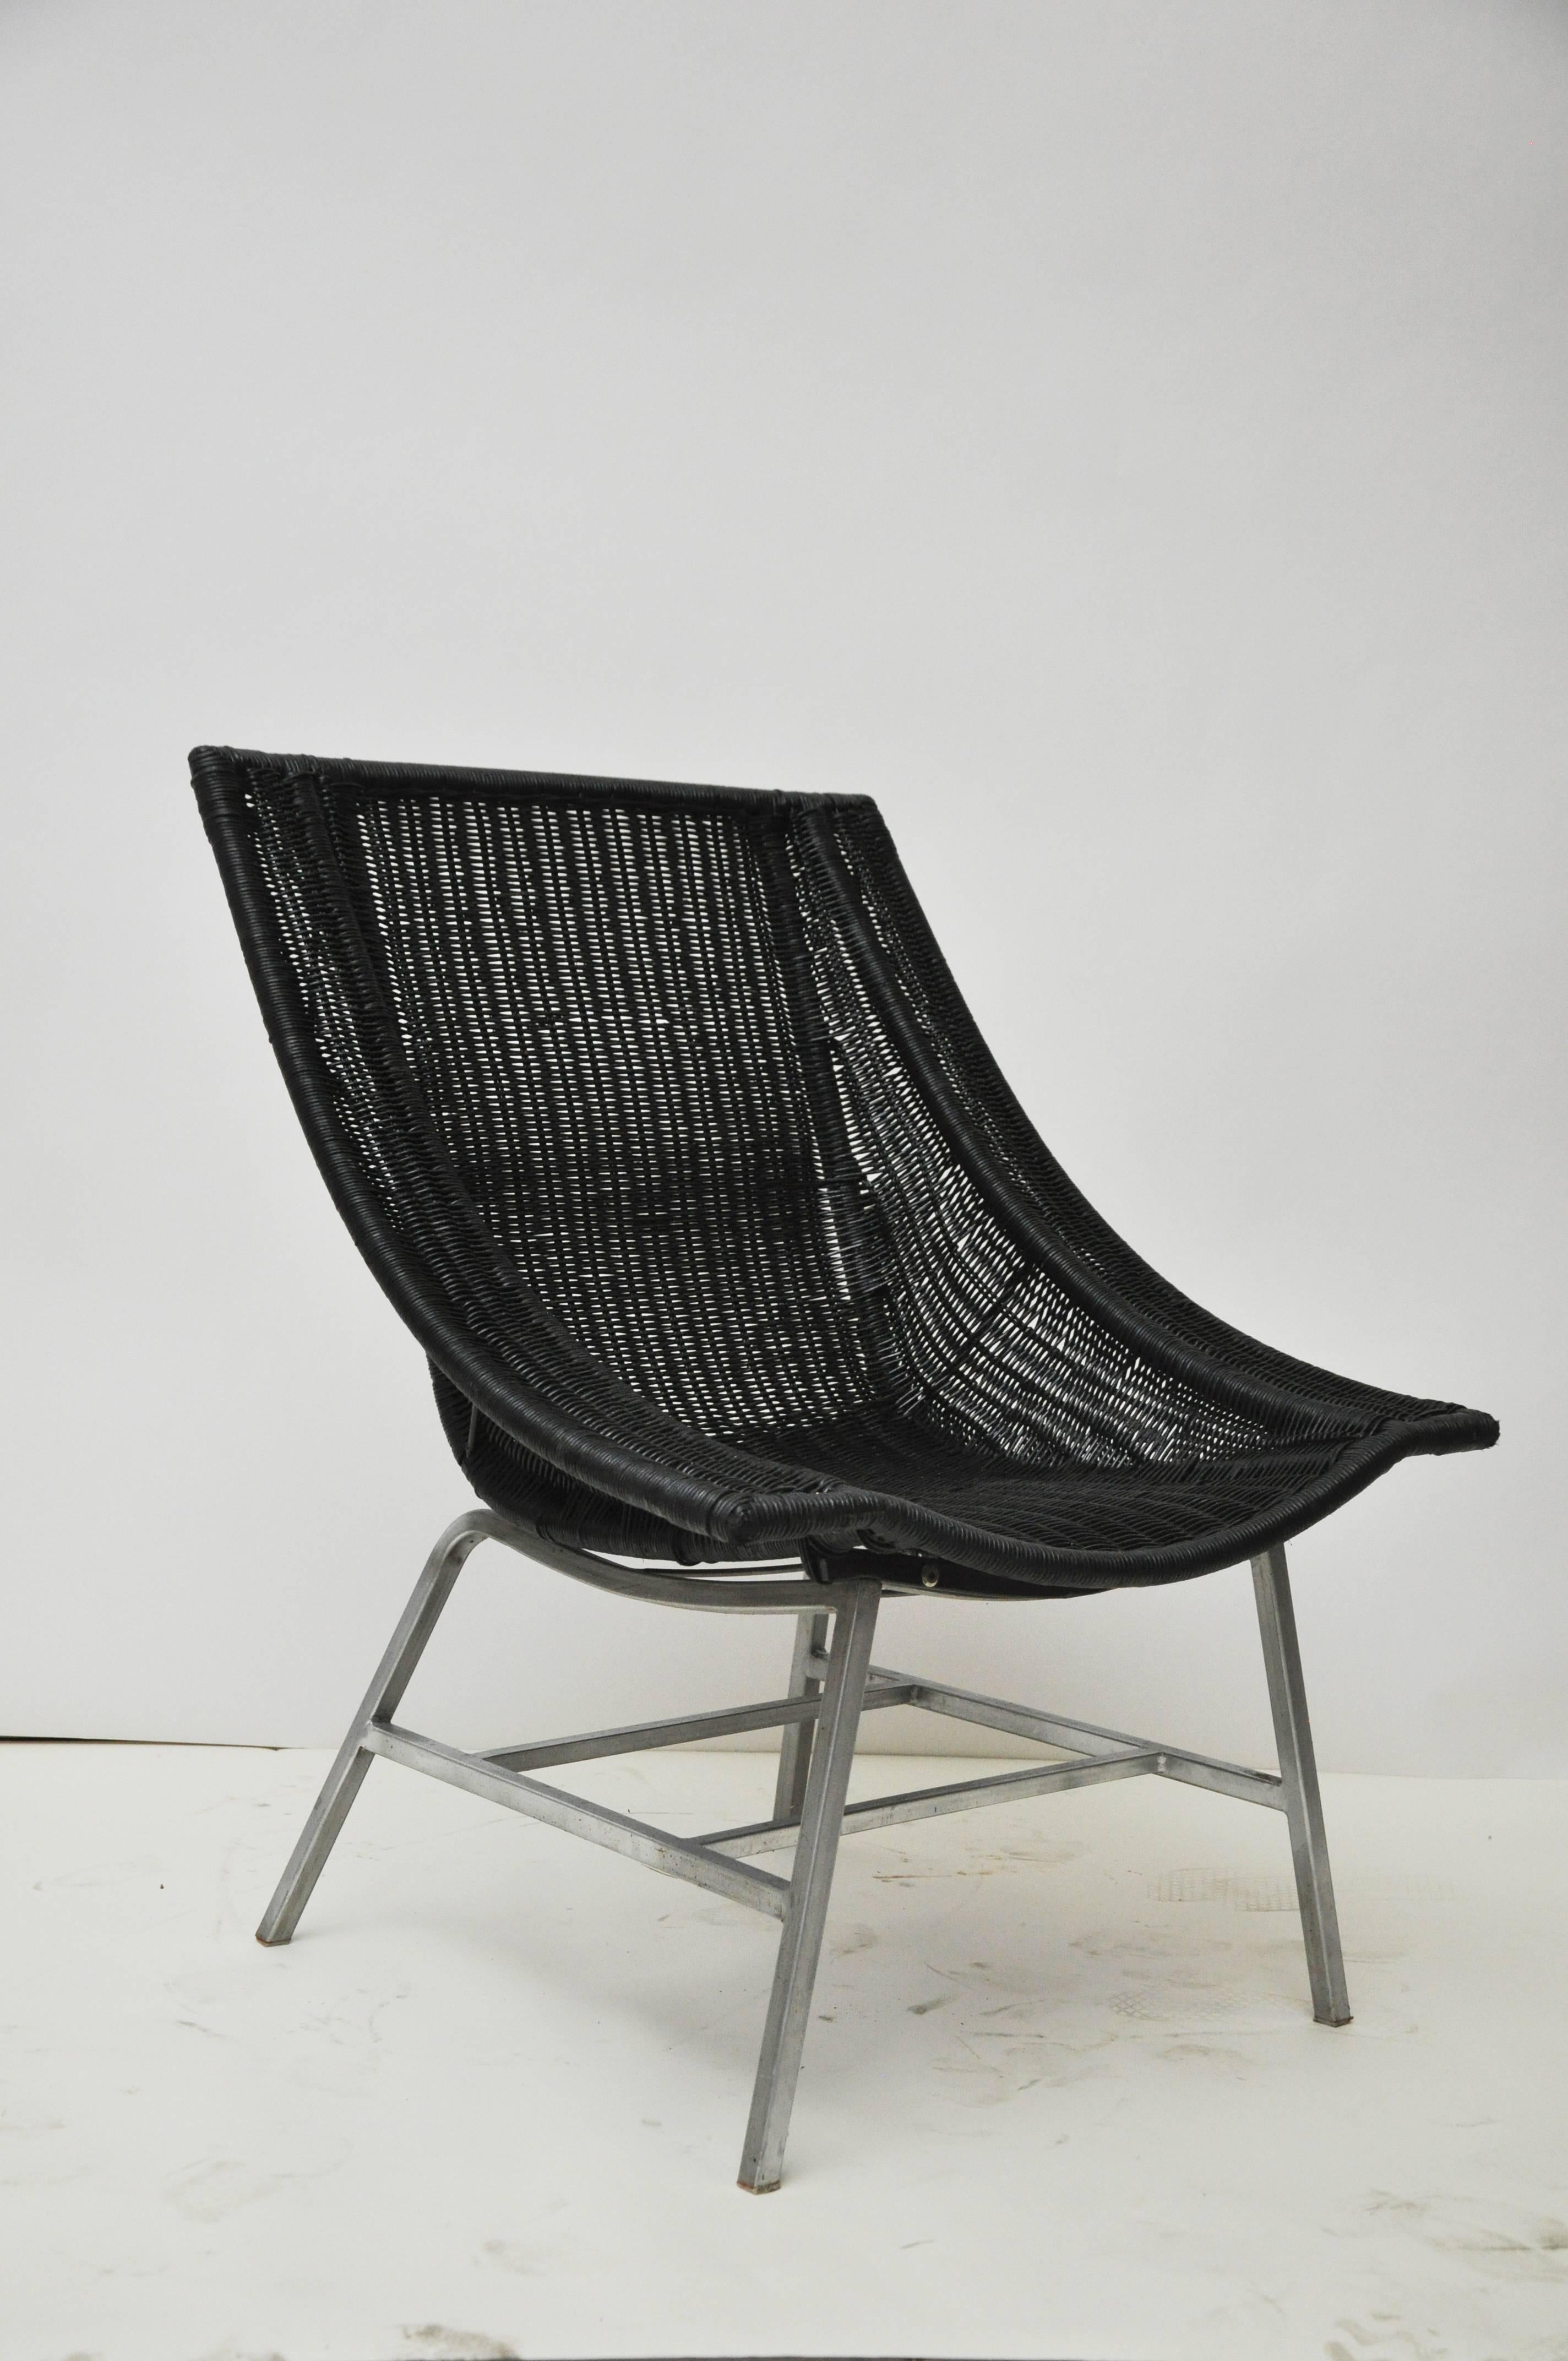 American Mid-Century Modern Wicker Chair For Sale